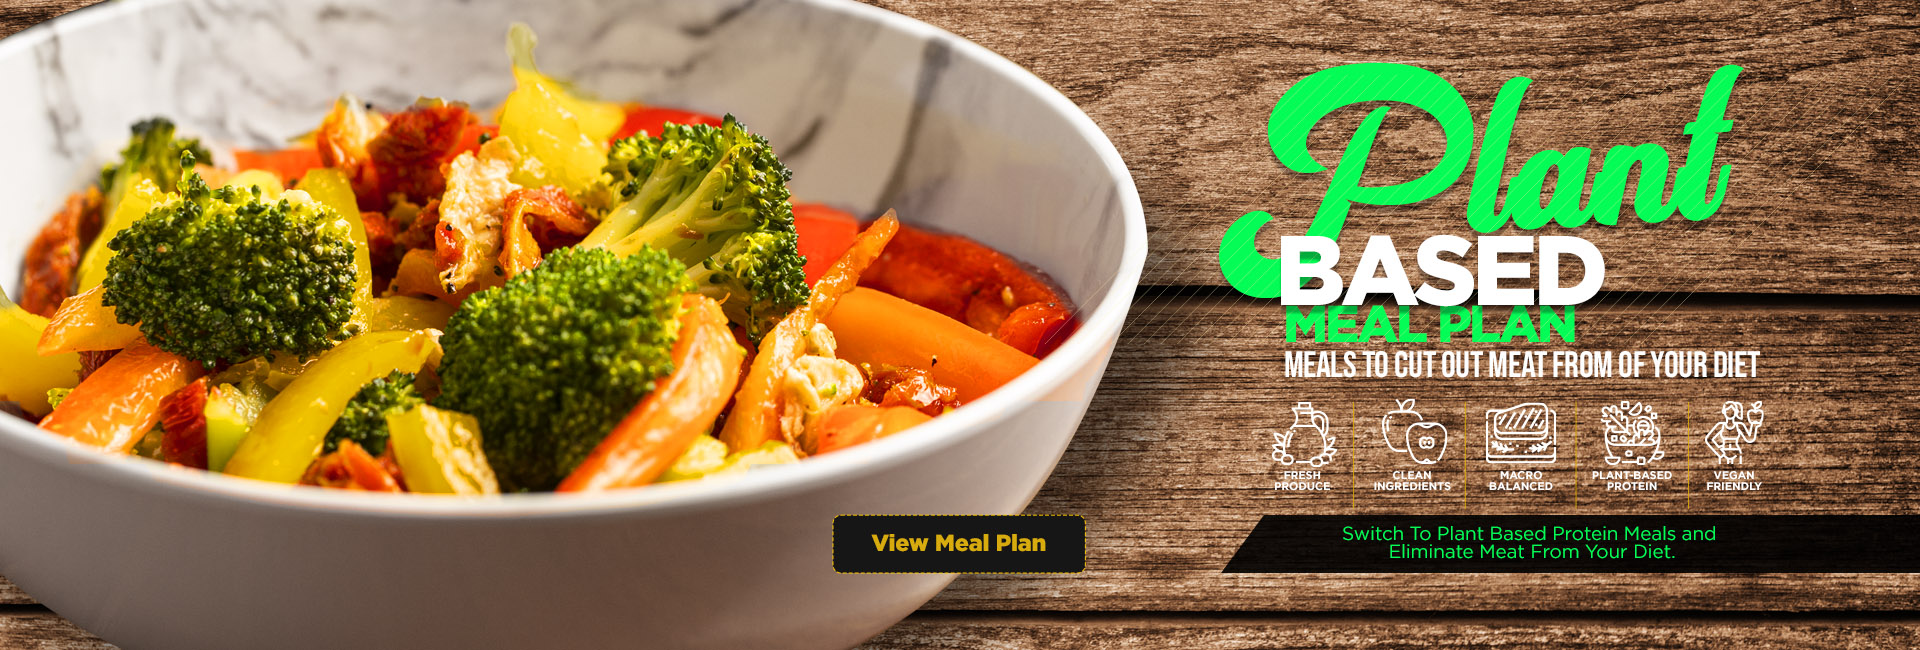 Plan Based Meal Plan - Meals To Cut Out Meat From of Your Diet.